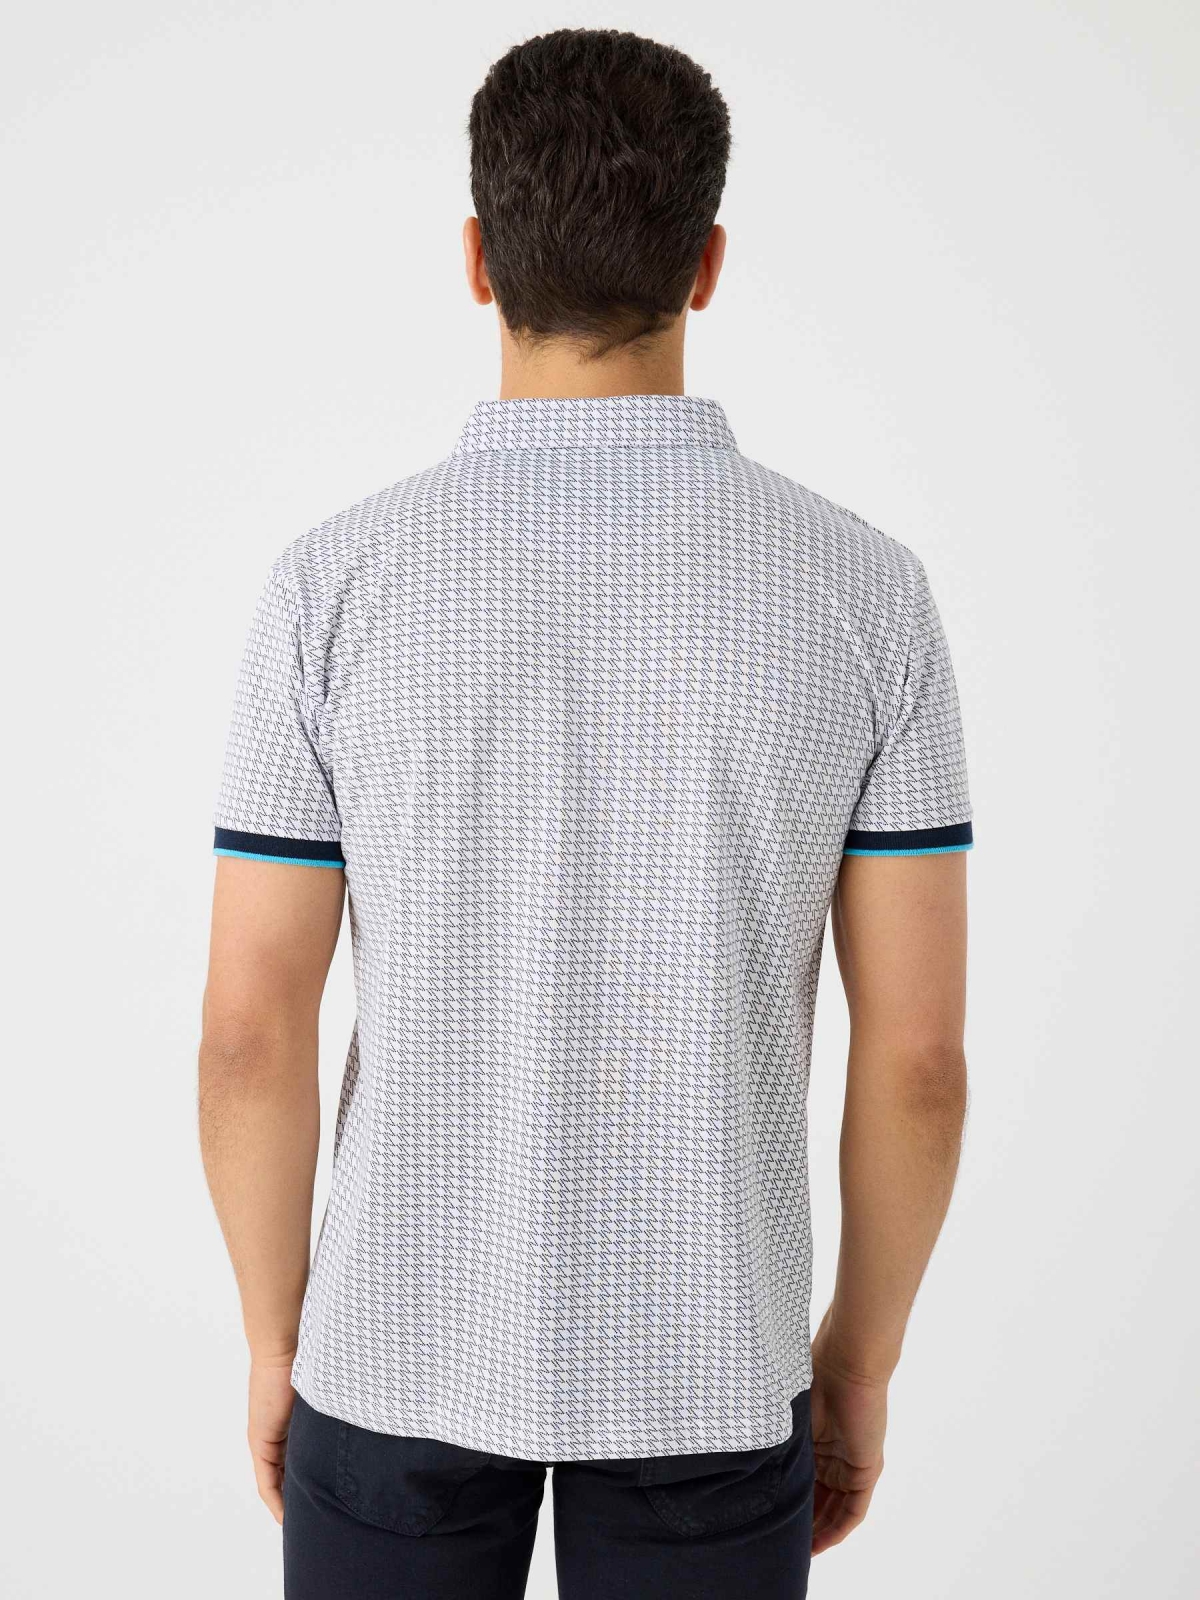 Printed polo shirt with button pocket navy middle back view